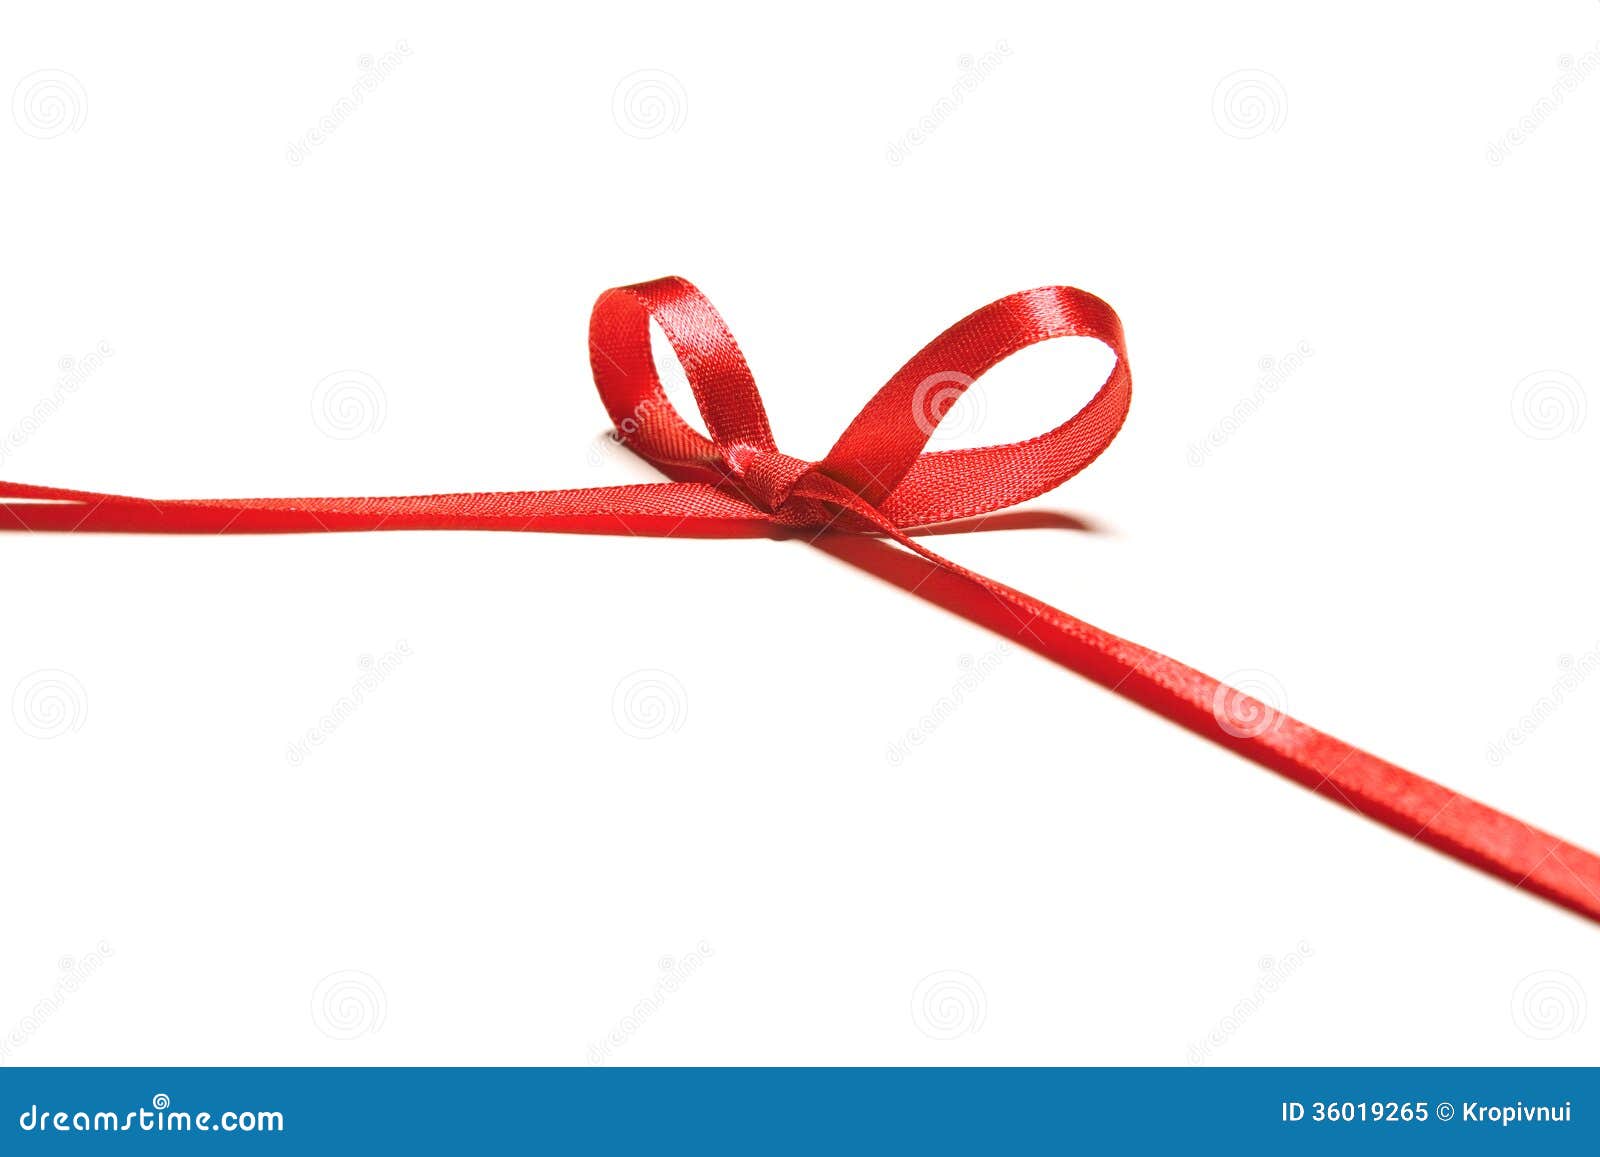 Beautiful Red Ribbon and Bow, Good for Design. Isolated on a White  Background Stock Image - Image of decorative, closeup: 36019265